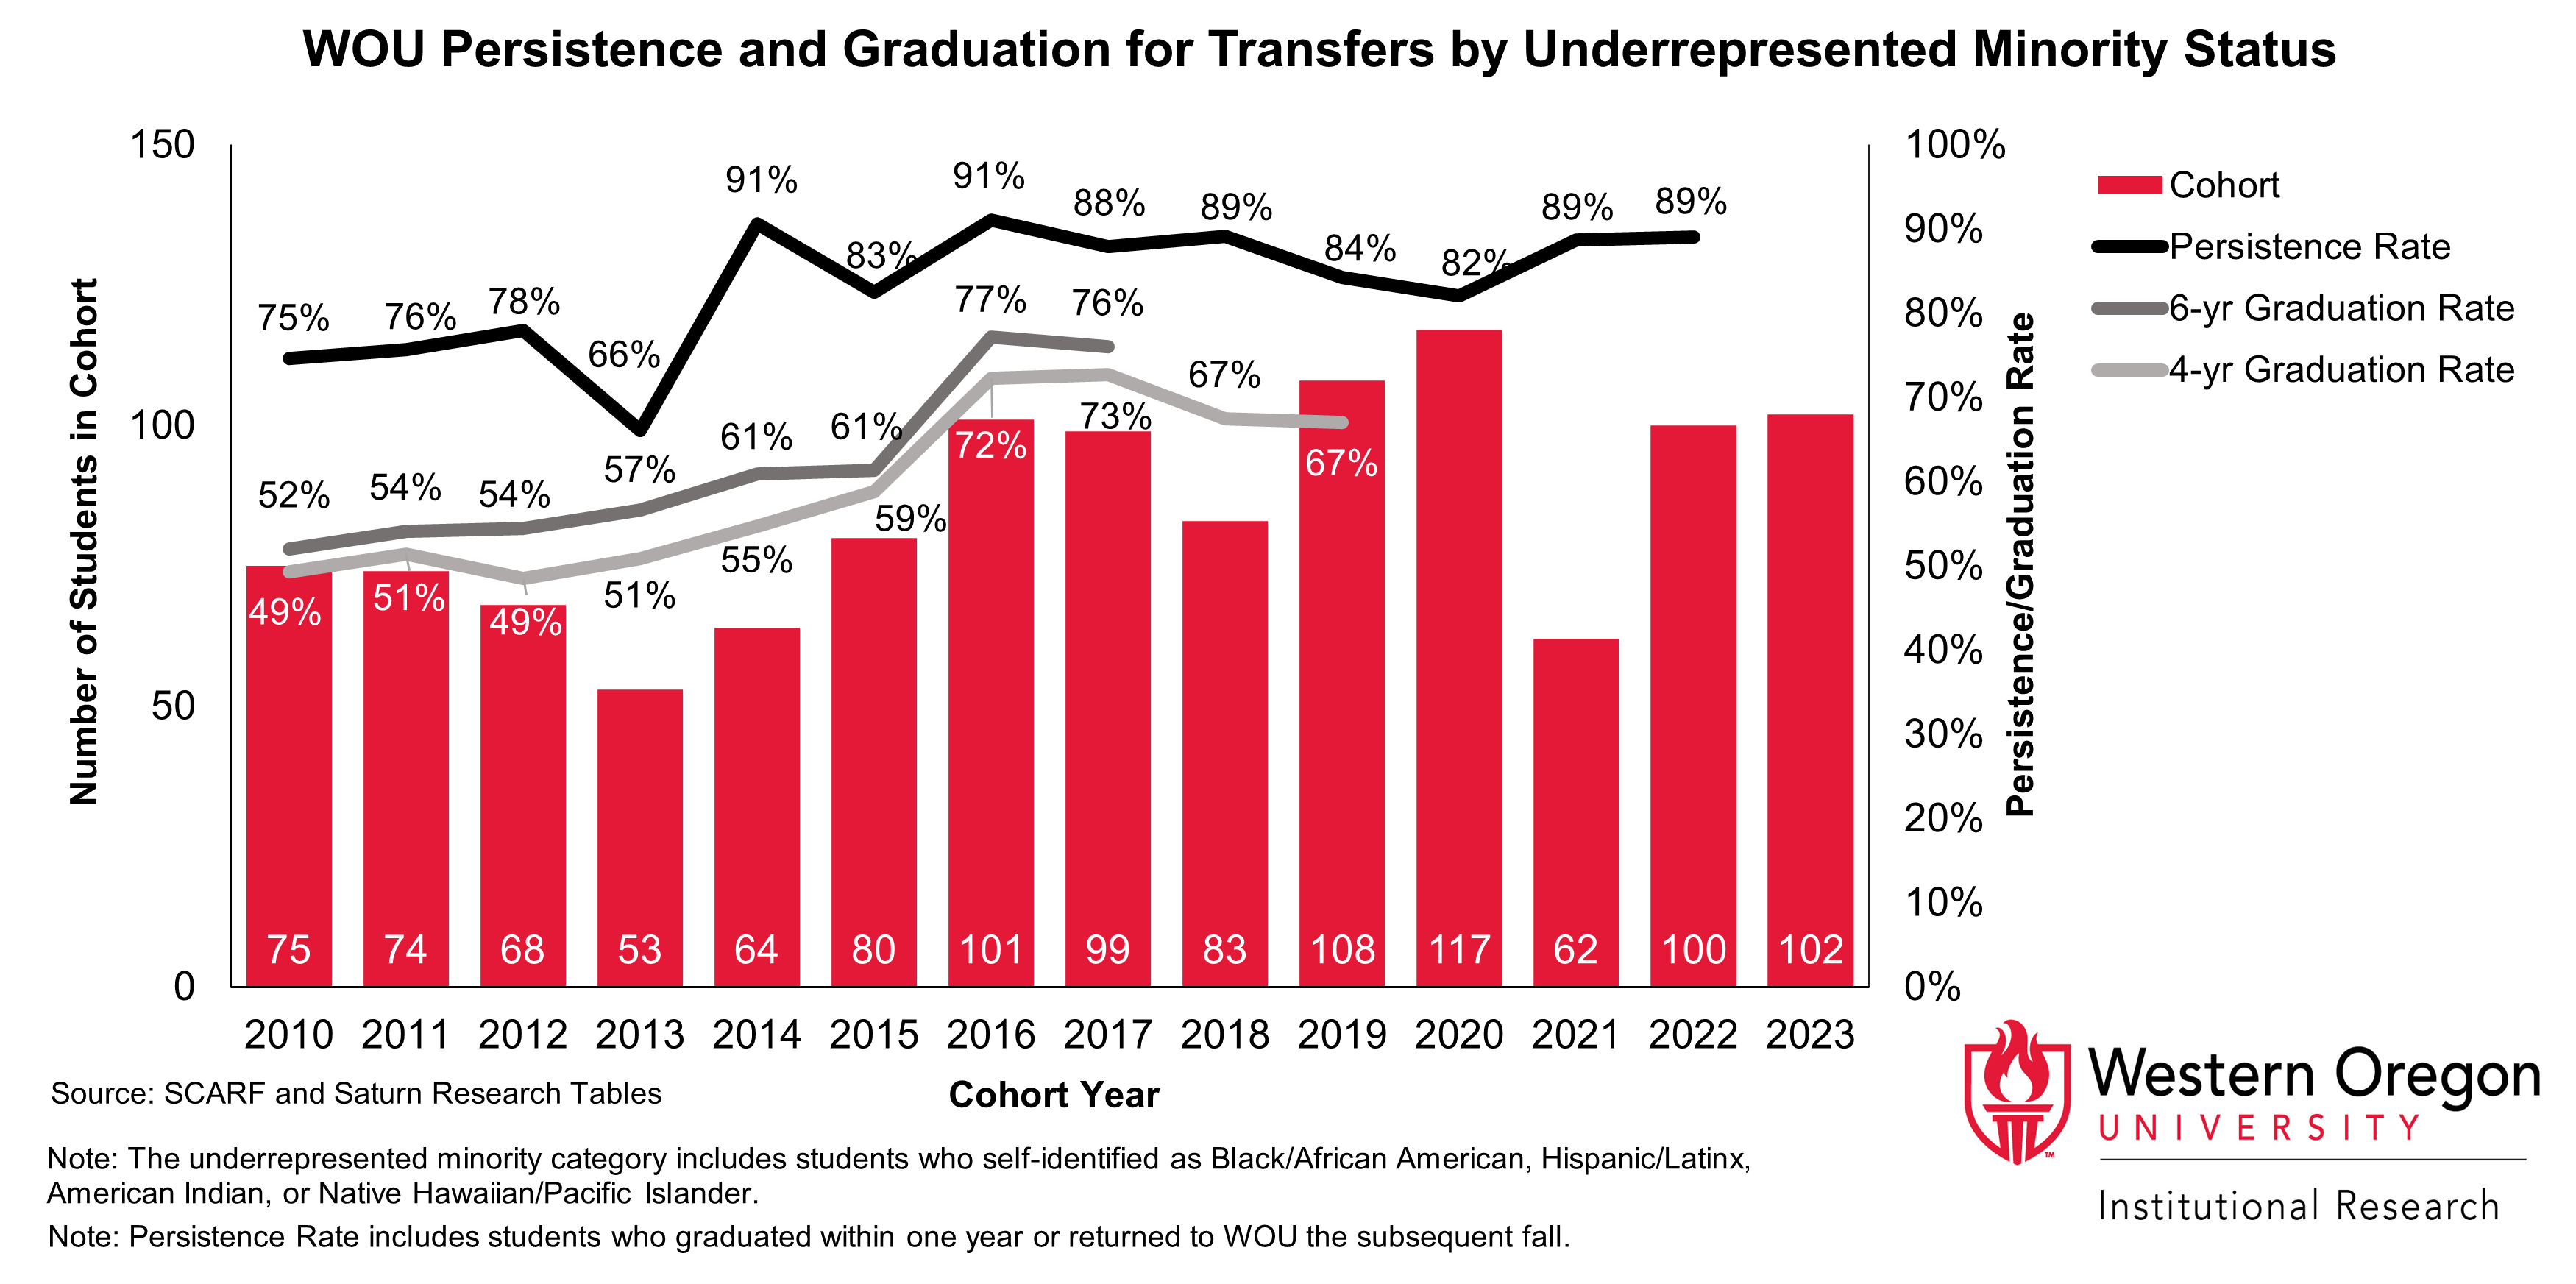 Bar and line graph of retention and 4- and 6-year graduation rates since 2010 for WOU transfer students from underrepresented minority groups, showing that graduation and retention rates have increased overall.